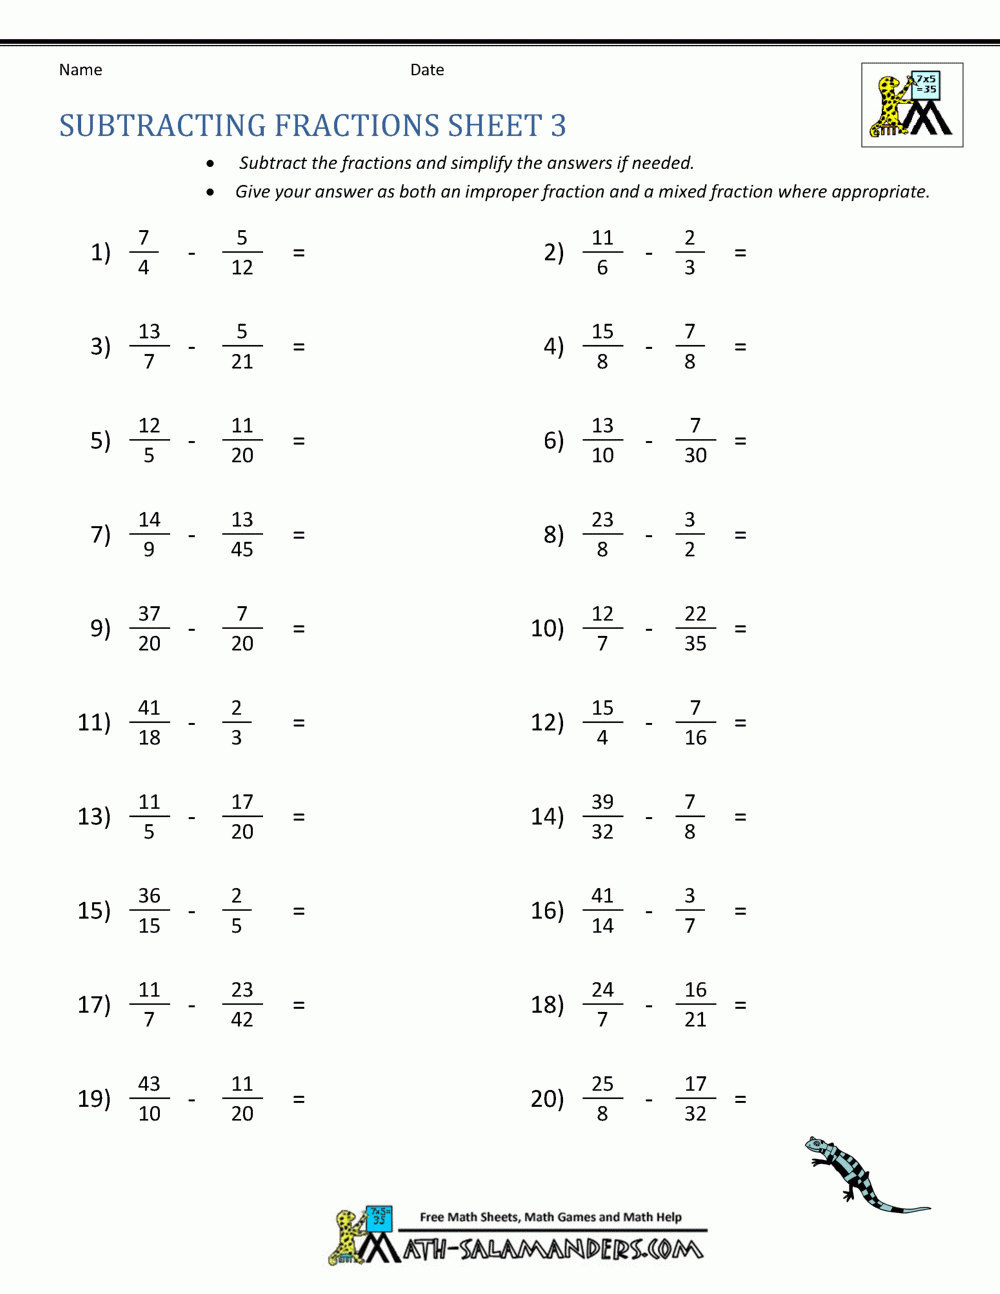 subtraction-of-fractions-worksheets-with-answers-fractionsworksheets